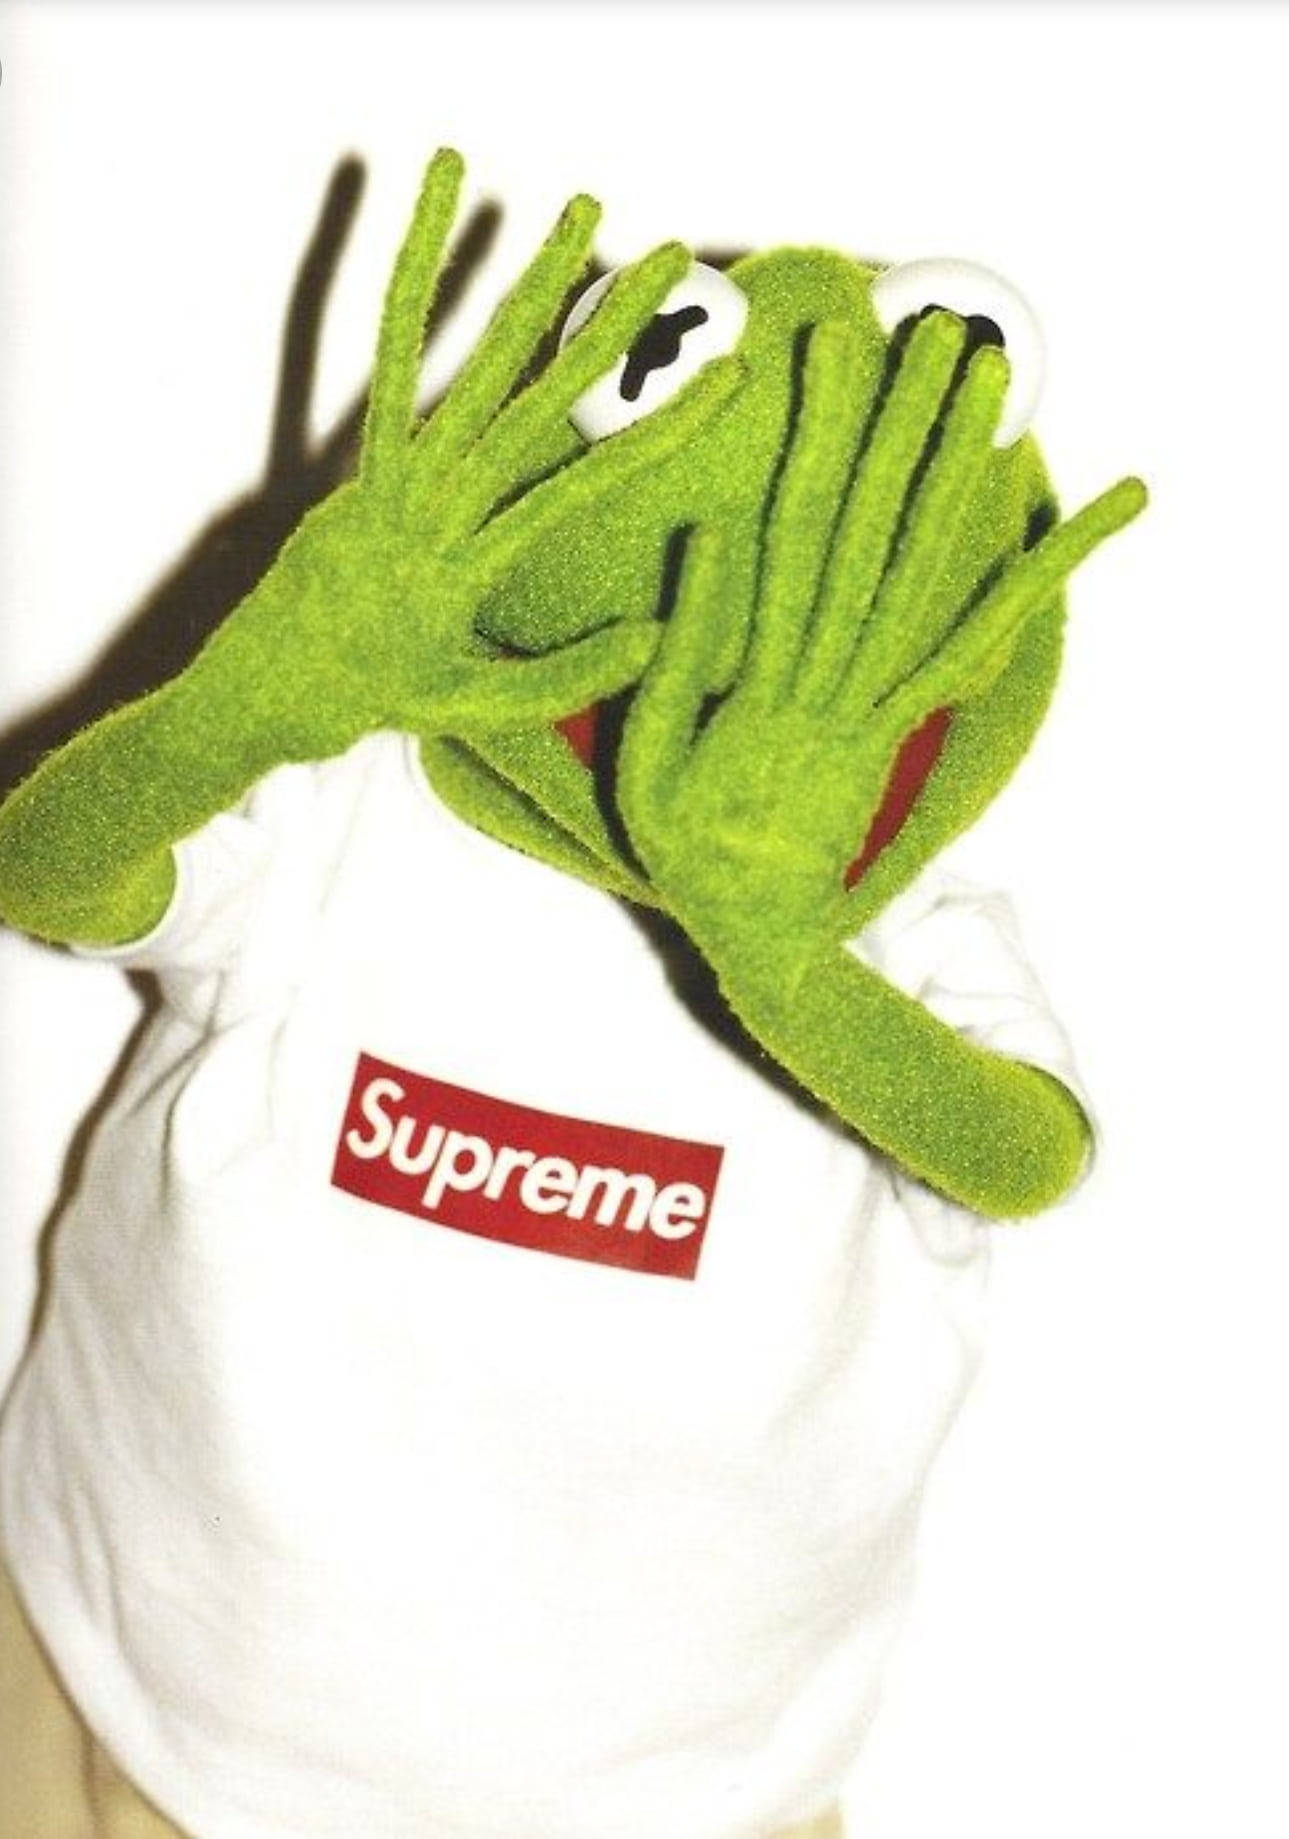 Kermit The Frog The Muppets Supreme Shirt